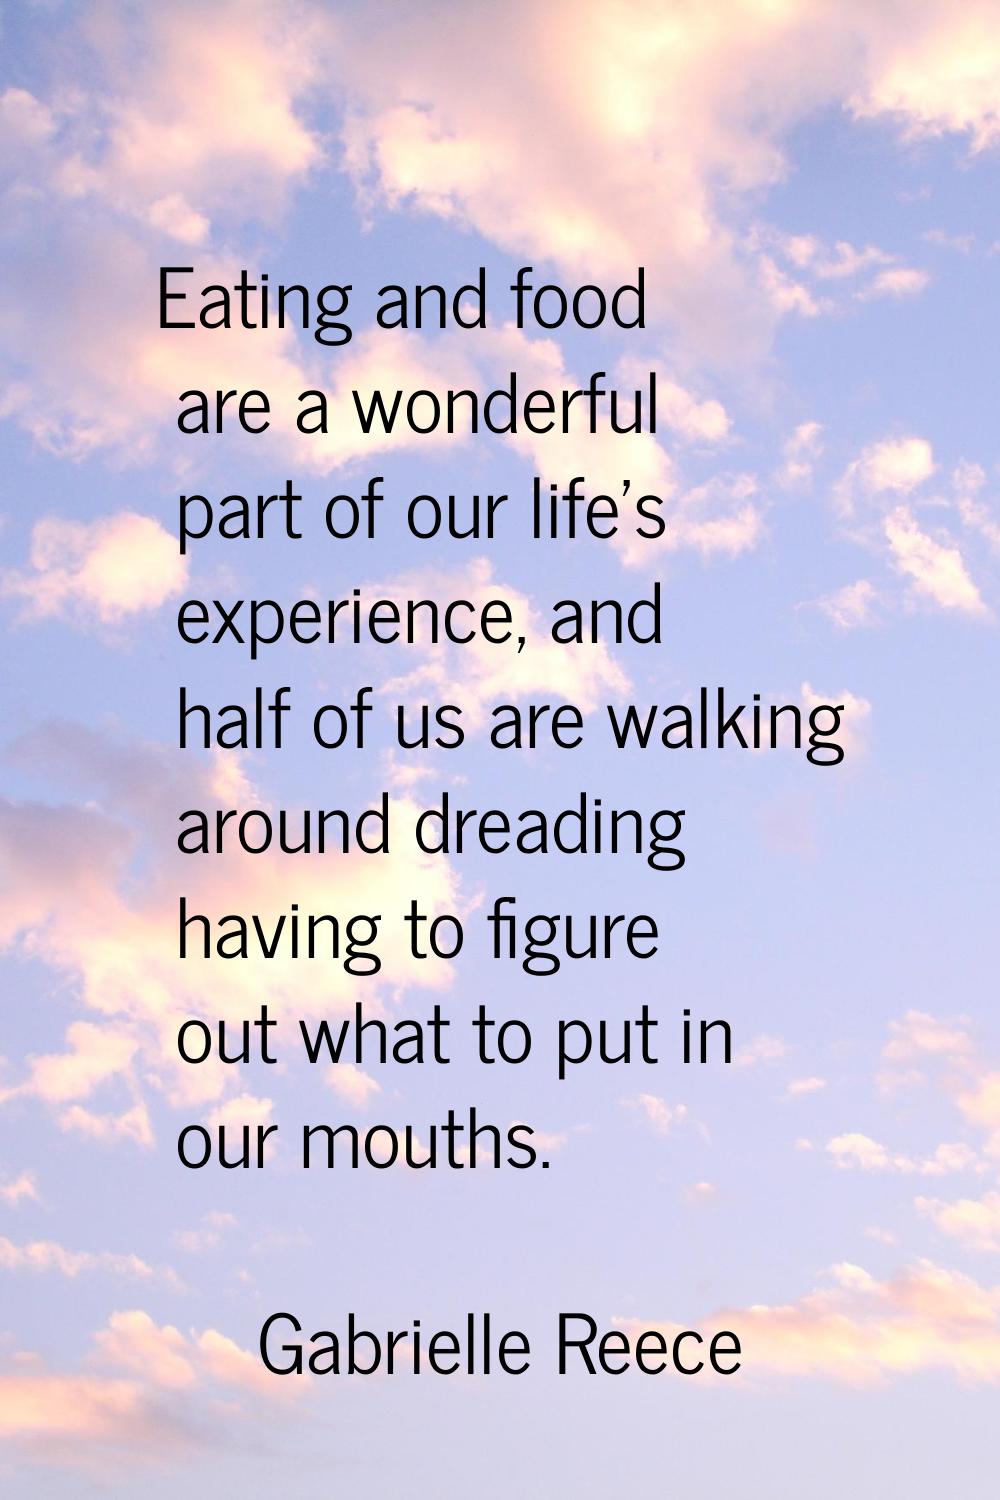 Eating and food are a wonderful part of our life's experience, and half of us are walking around dr